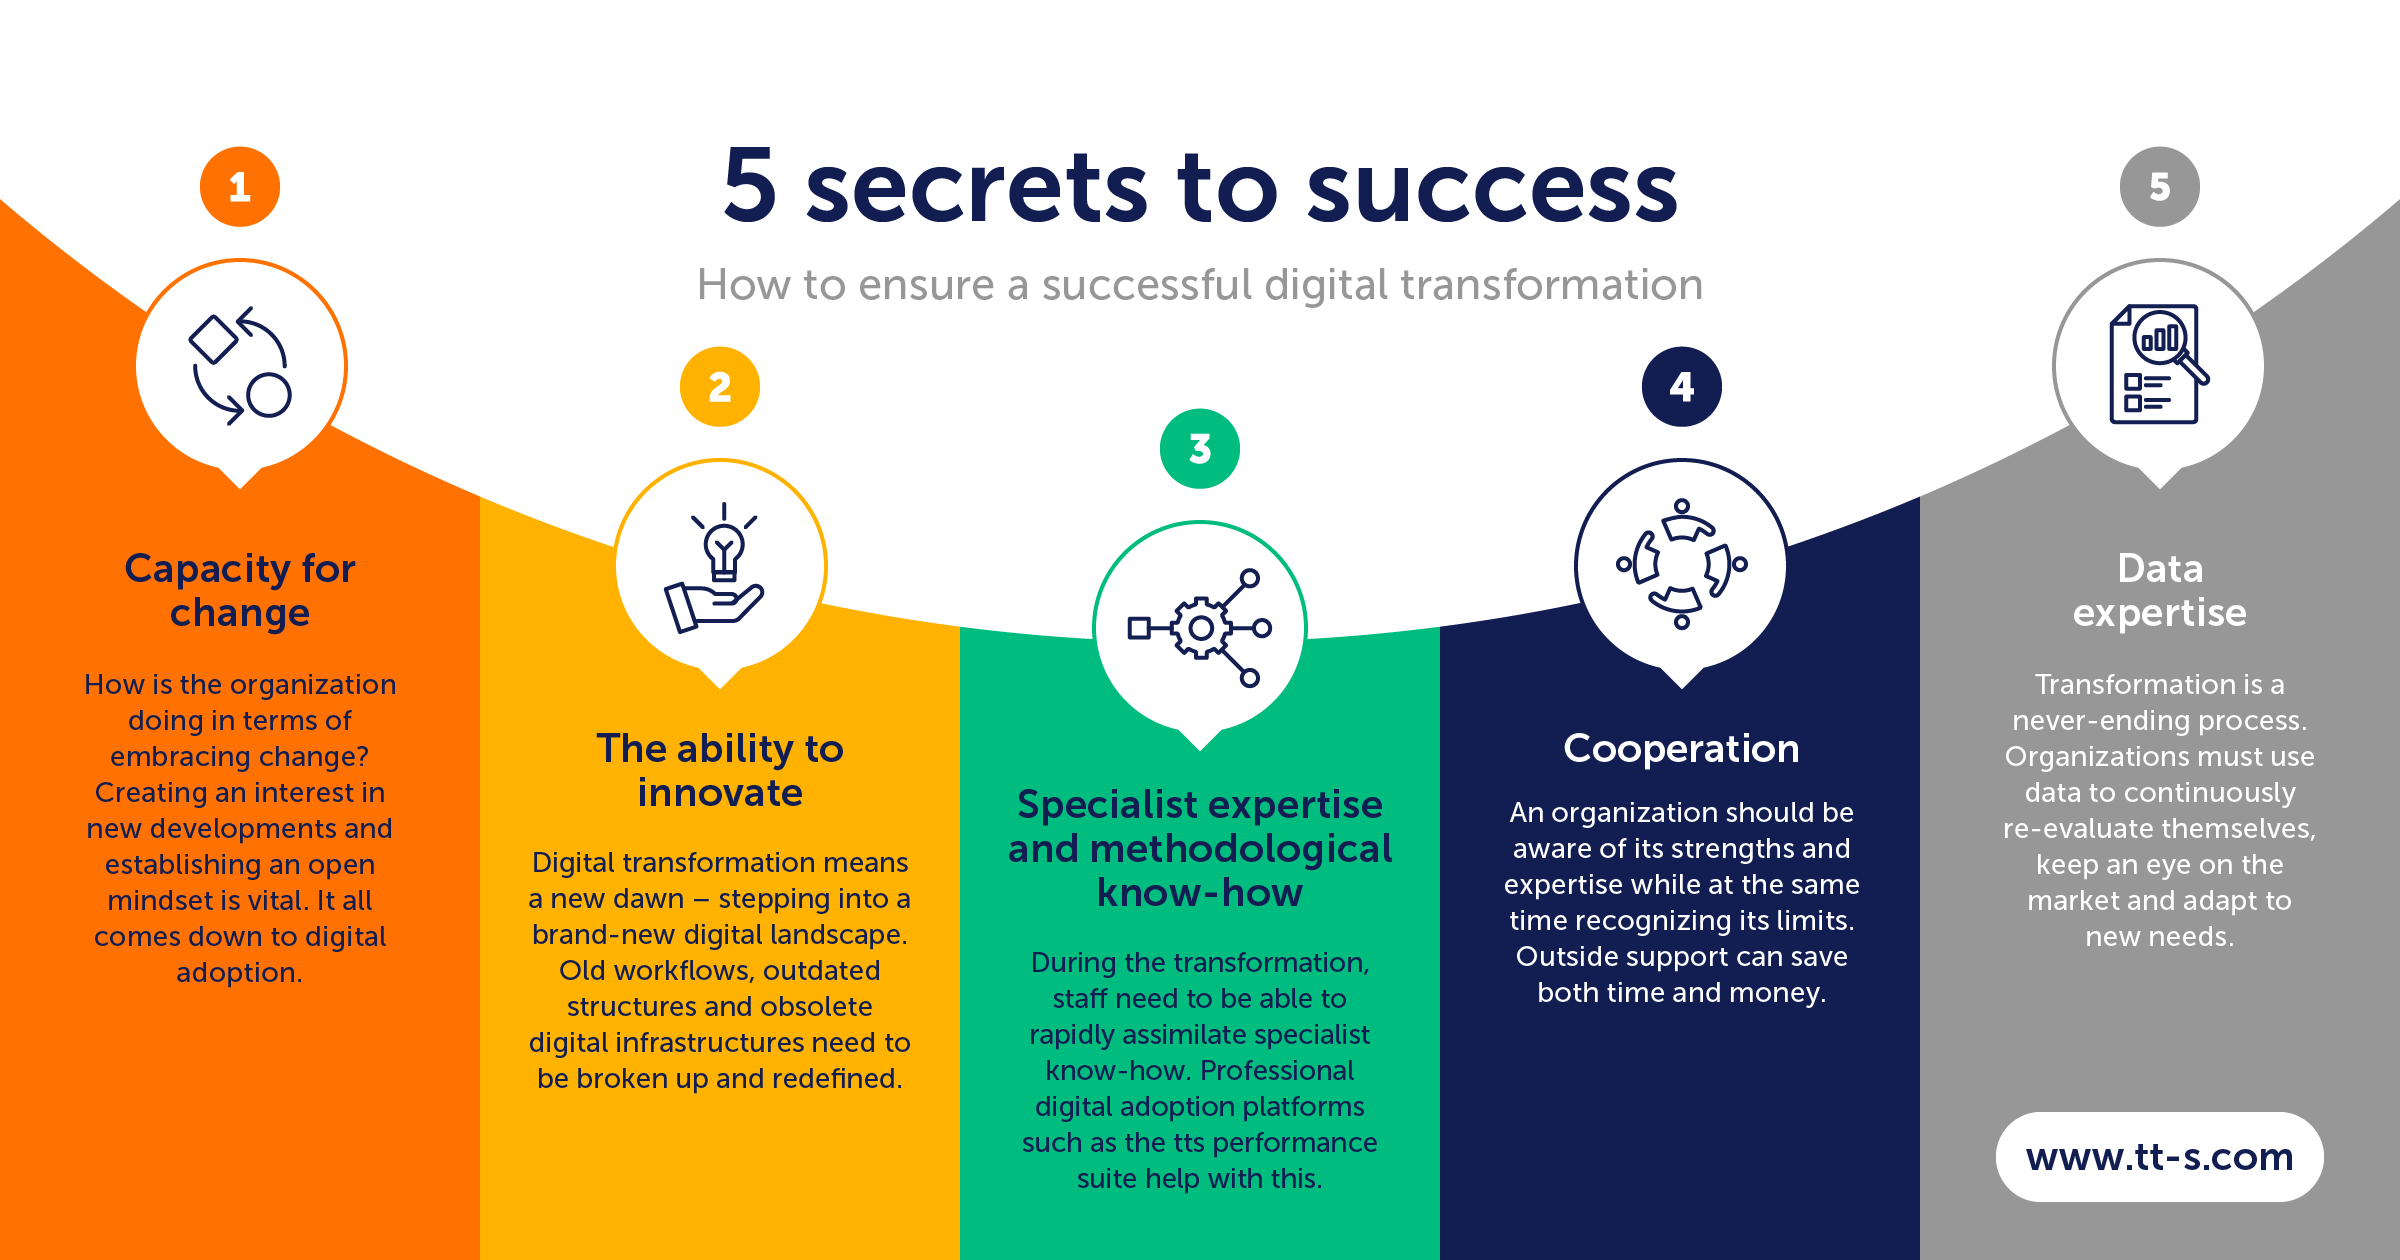 Five secrets for a successful digital transformation (competencies and prerequisites).